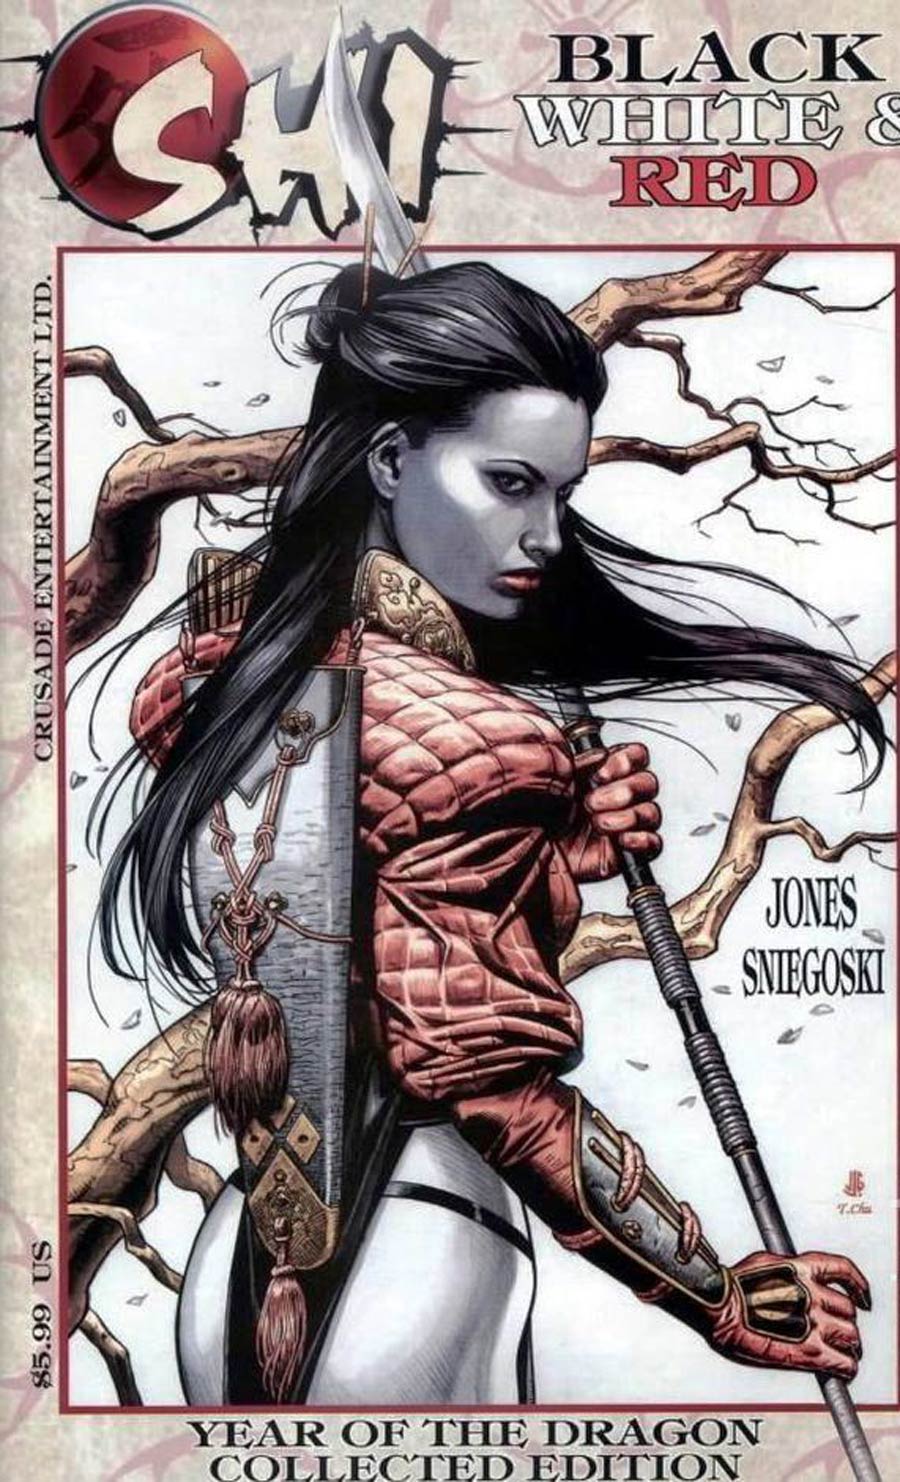 Shi Black White And Red Year of the Dragon Collected Edition